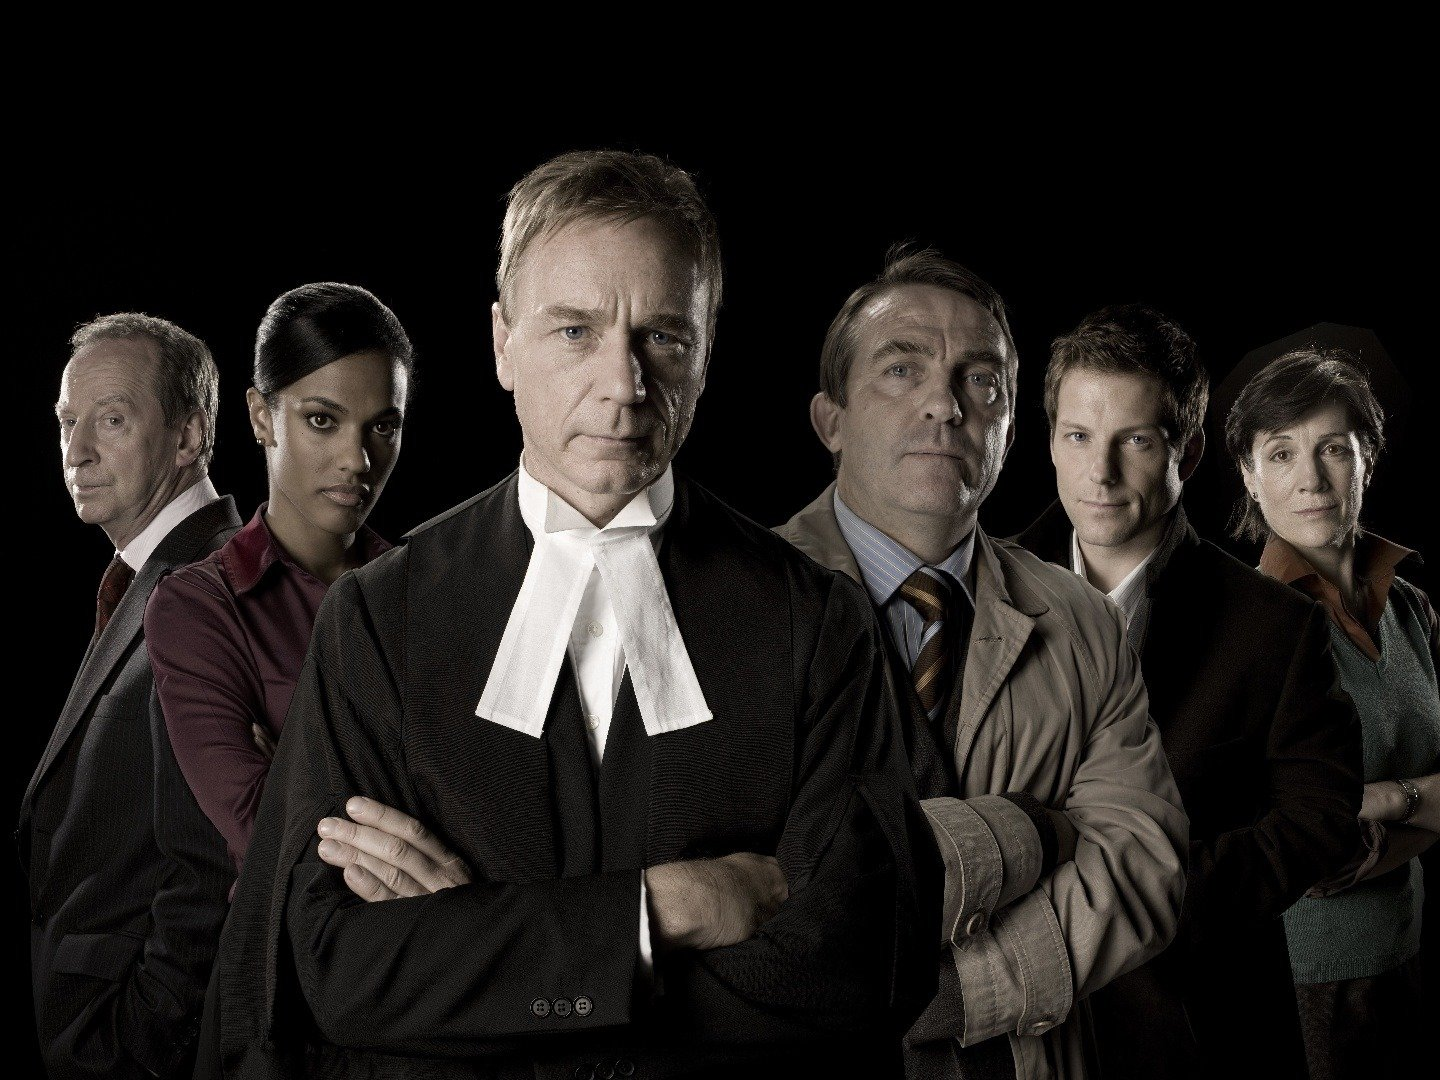 The cast of Law & Order: UK stands with their arms crossed in front of a black background.